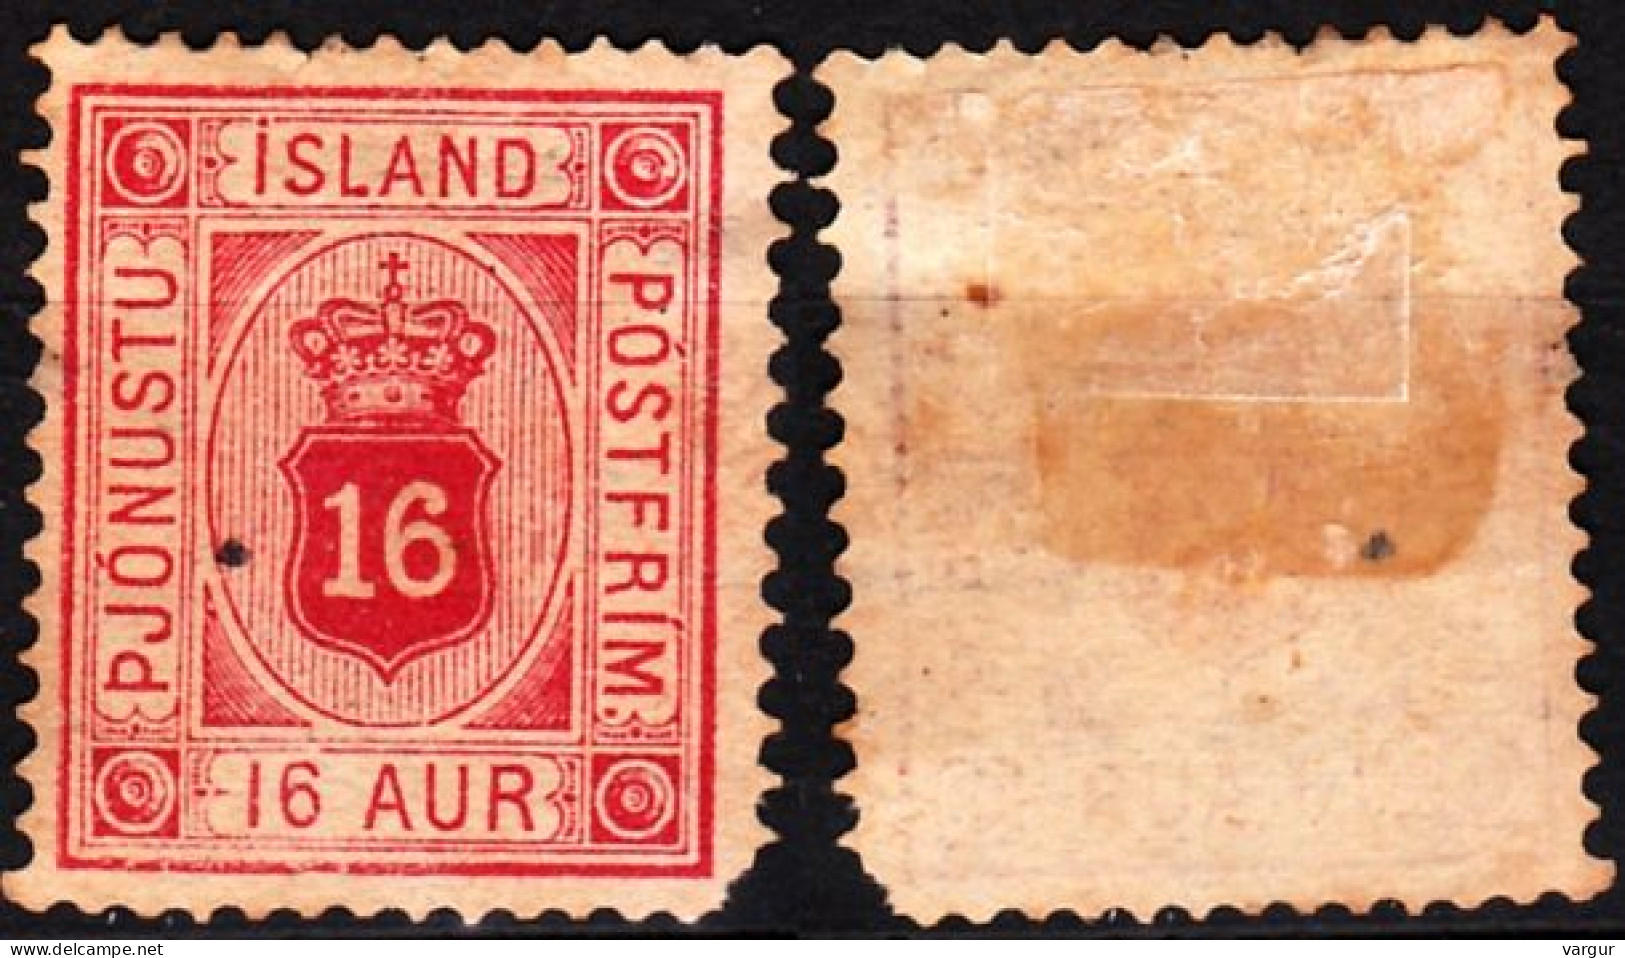 ICELAND / ISLAND Postage Due 1876 Figure In Oval. 16A, Perf 14:13 1/2, MH No Gum - Servizio